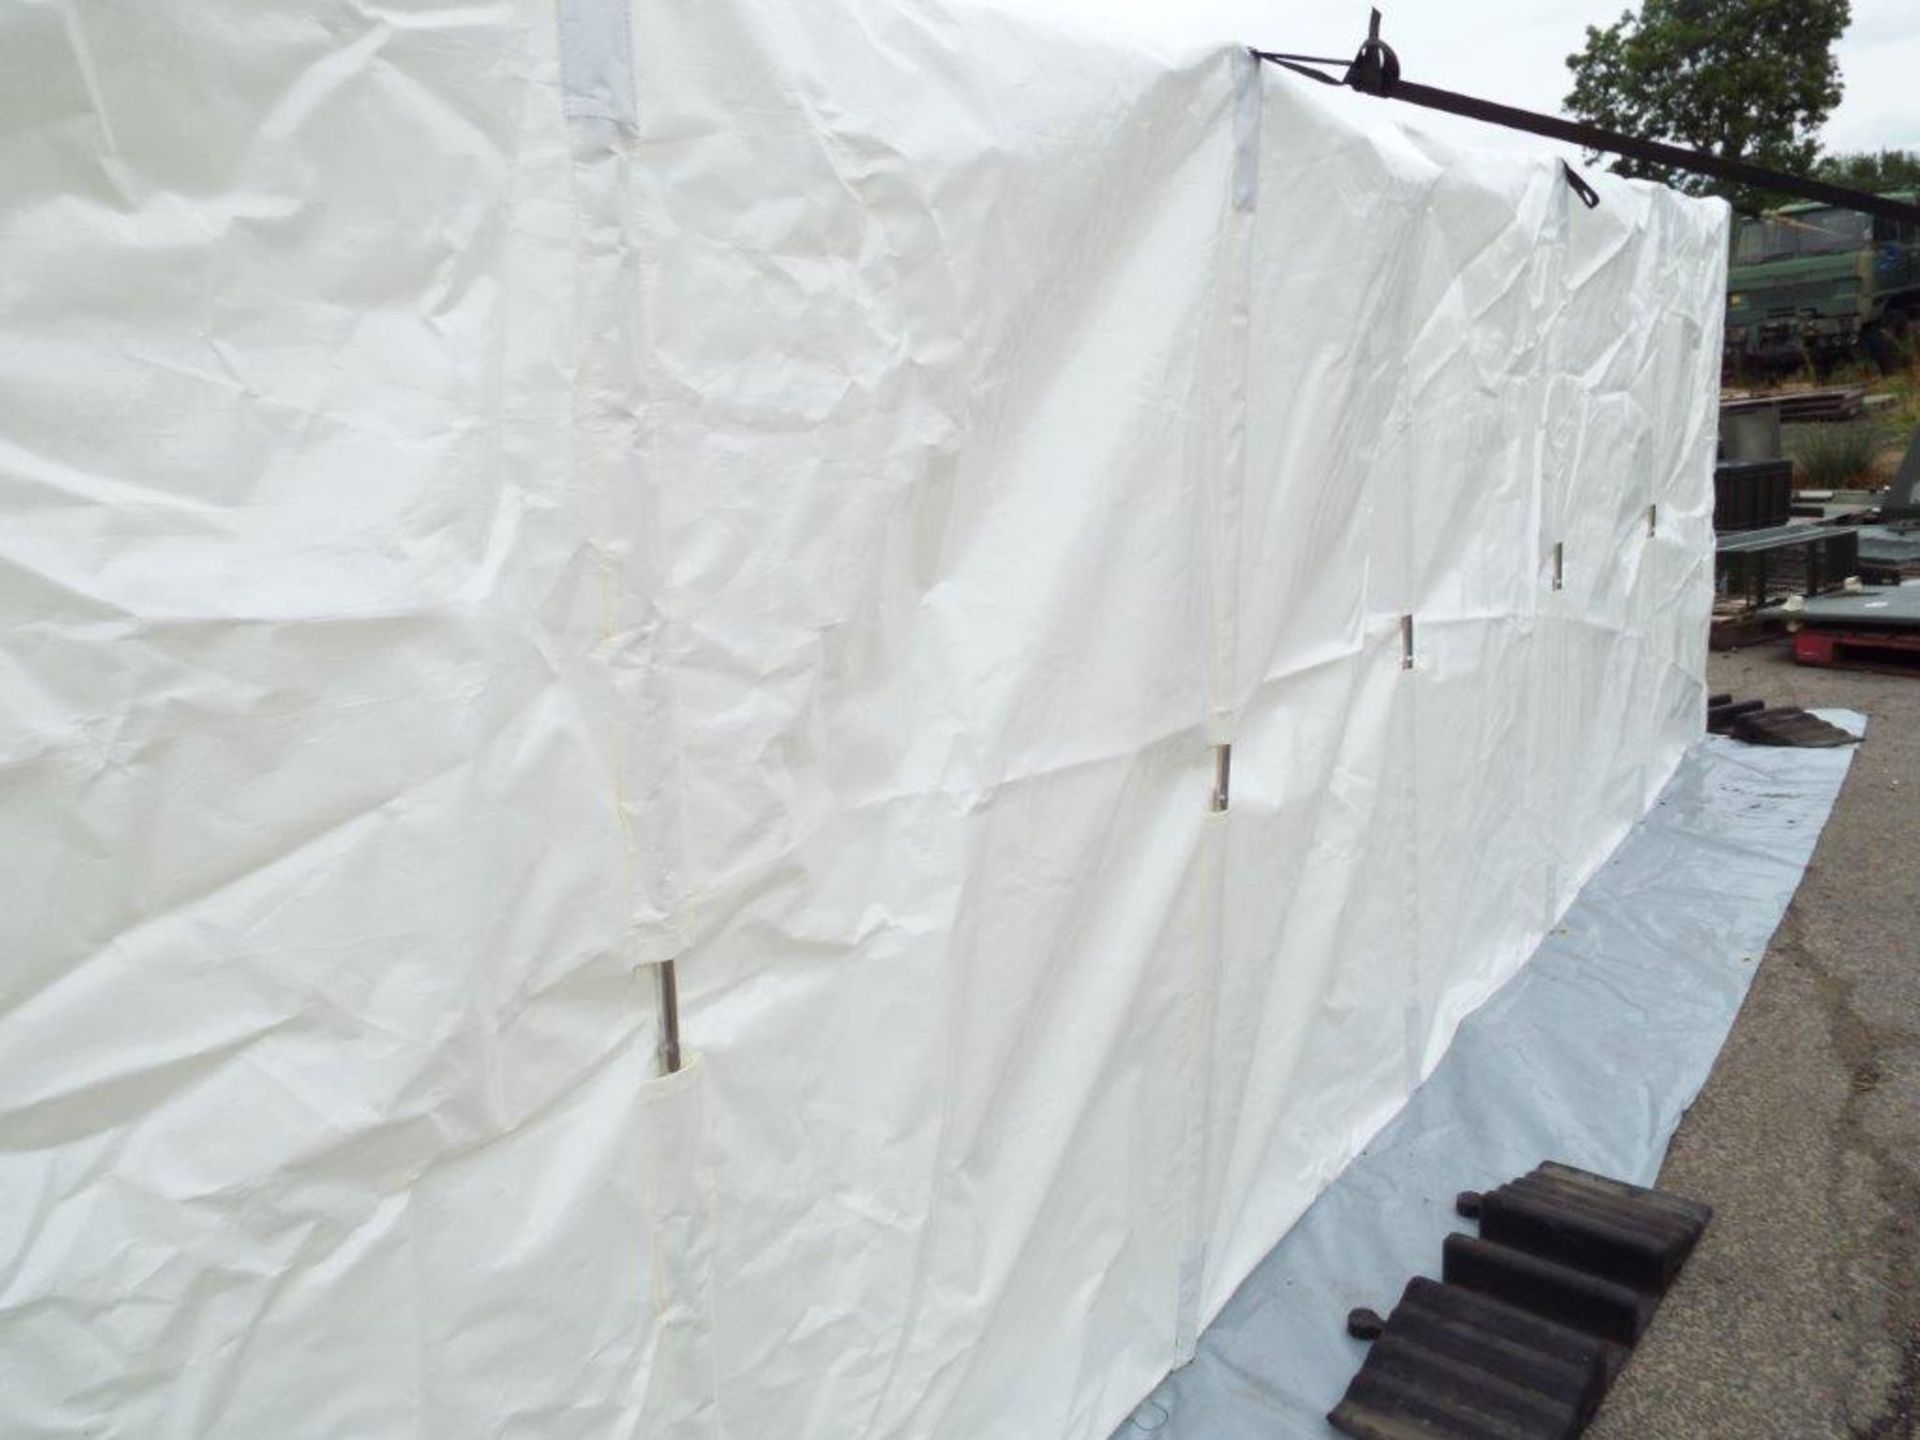 Unissued 8mx4m Inflateable Decontamination/Party Tent - Image 5 of 15